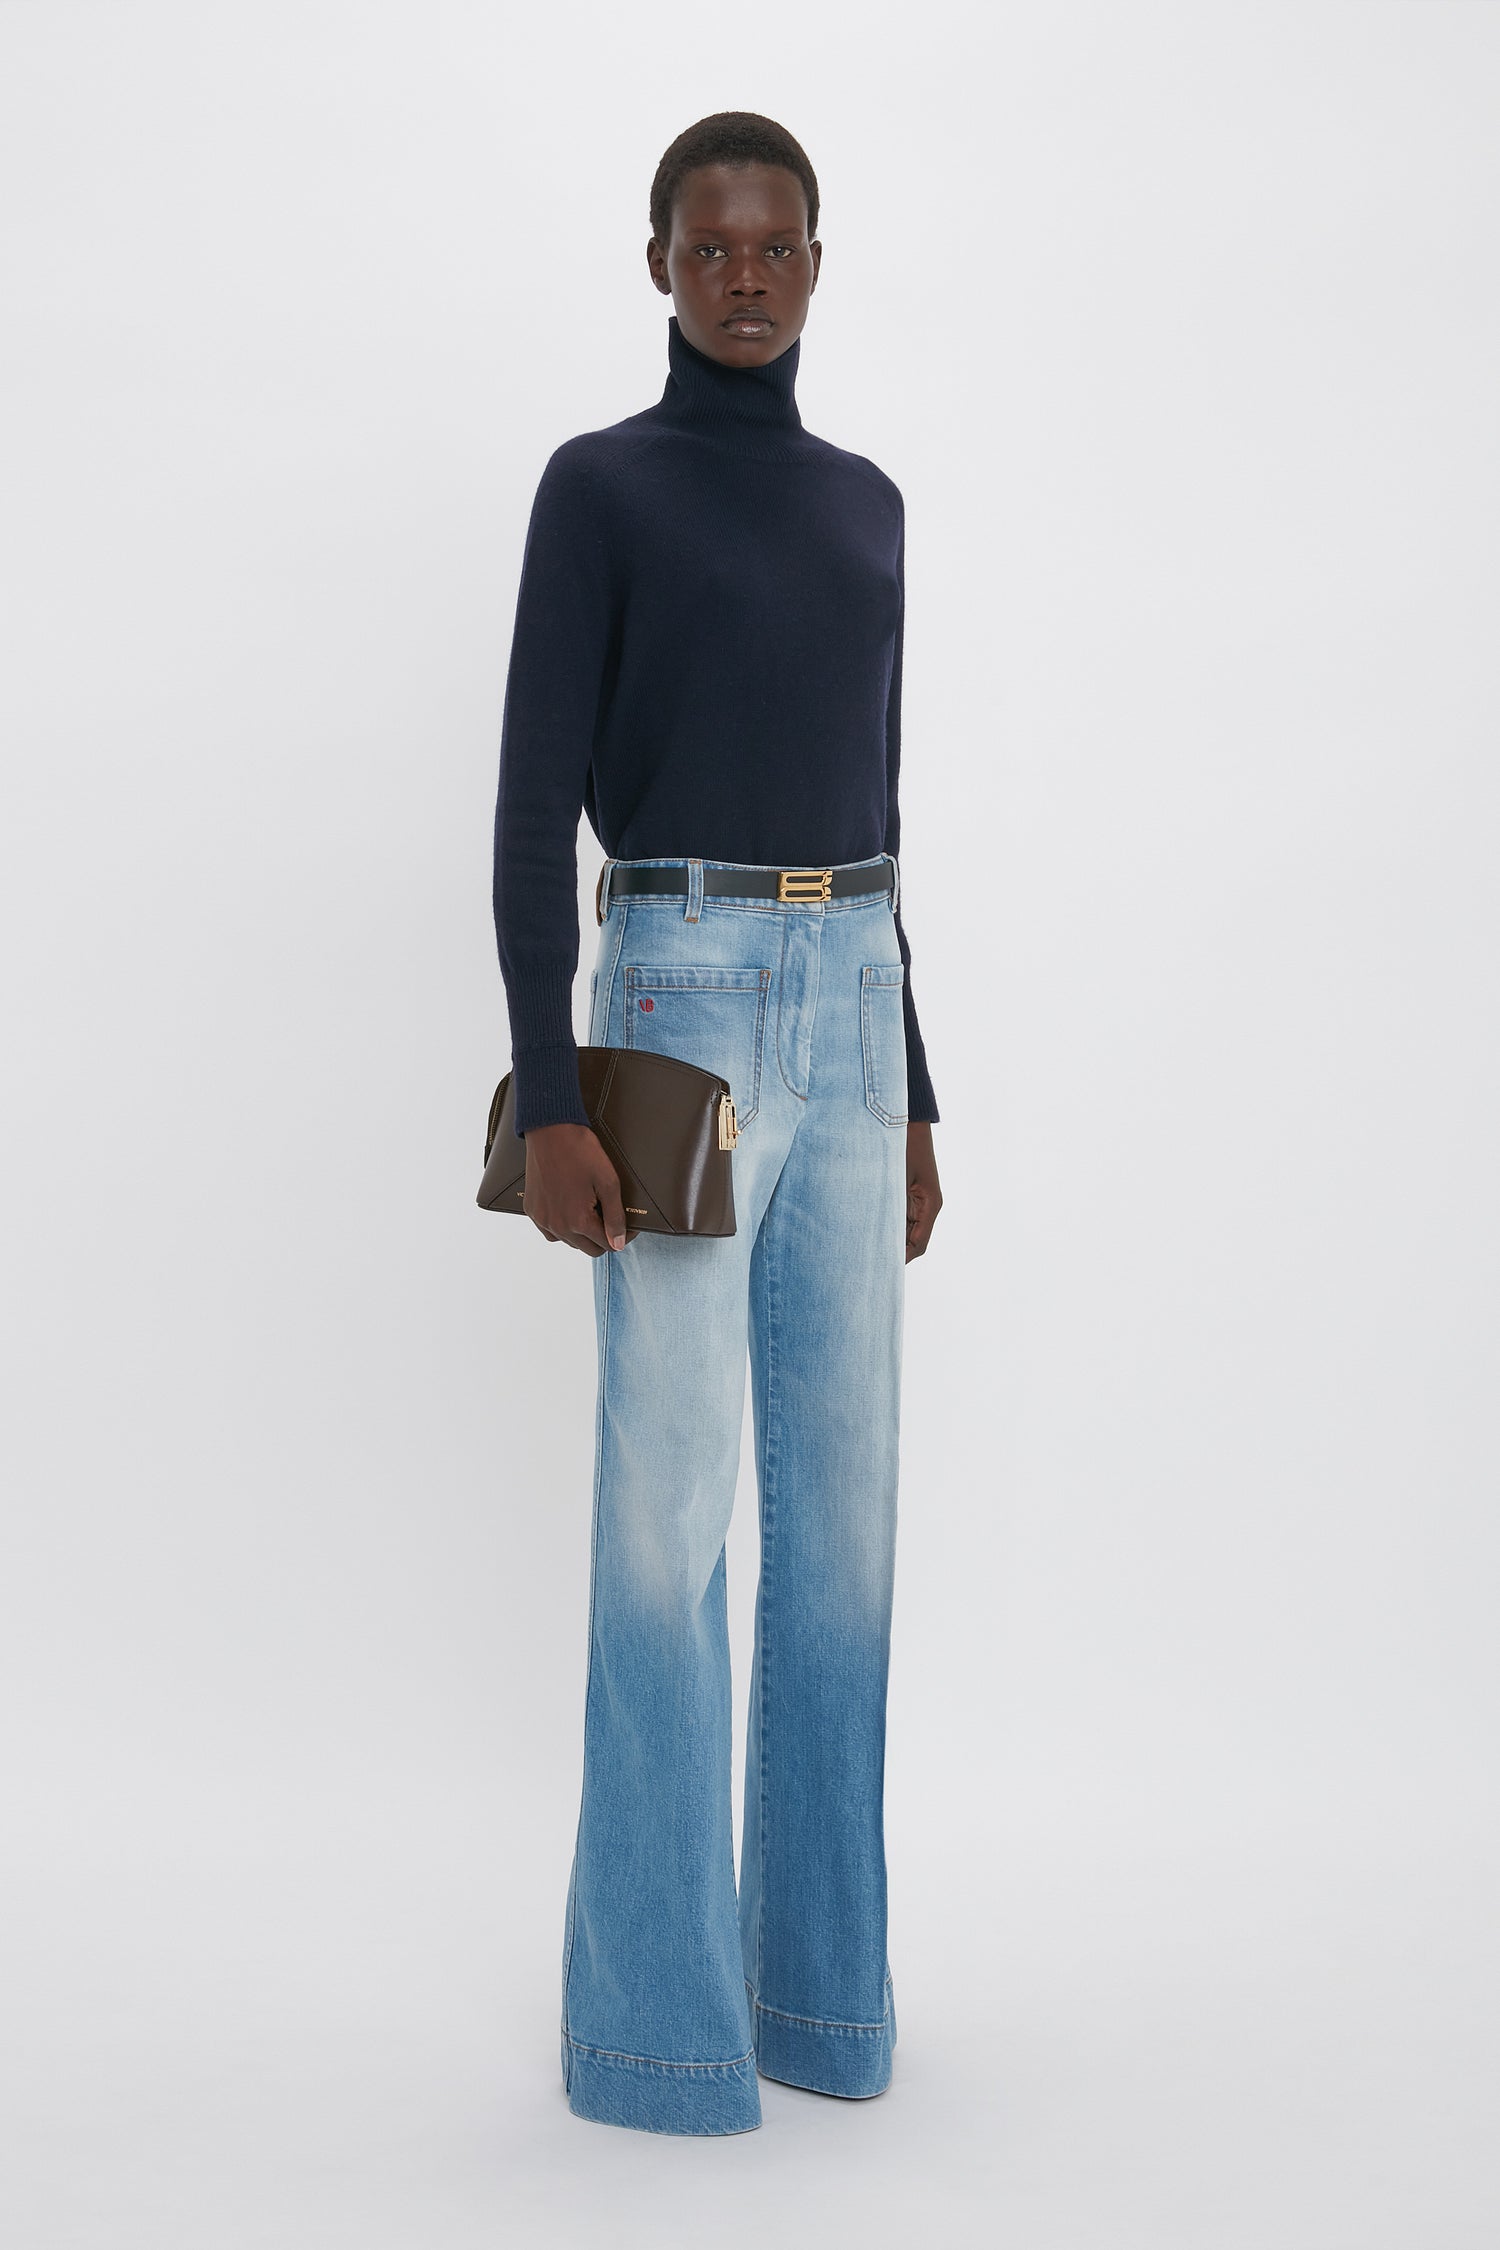 A person stands against a white background, wearing a navy turtleneck, Victoria Beckham Alina High Waisted Jean In Light Summer Wash, and holding a brown clutch bag.